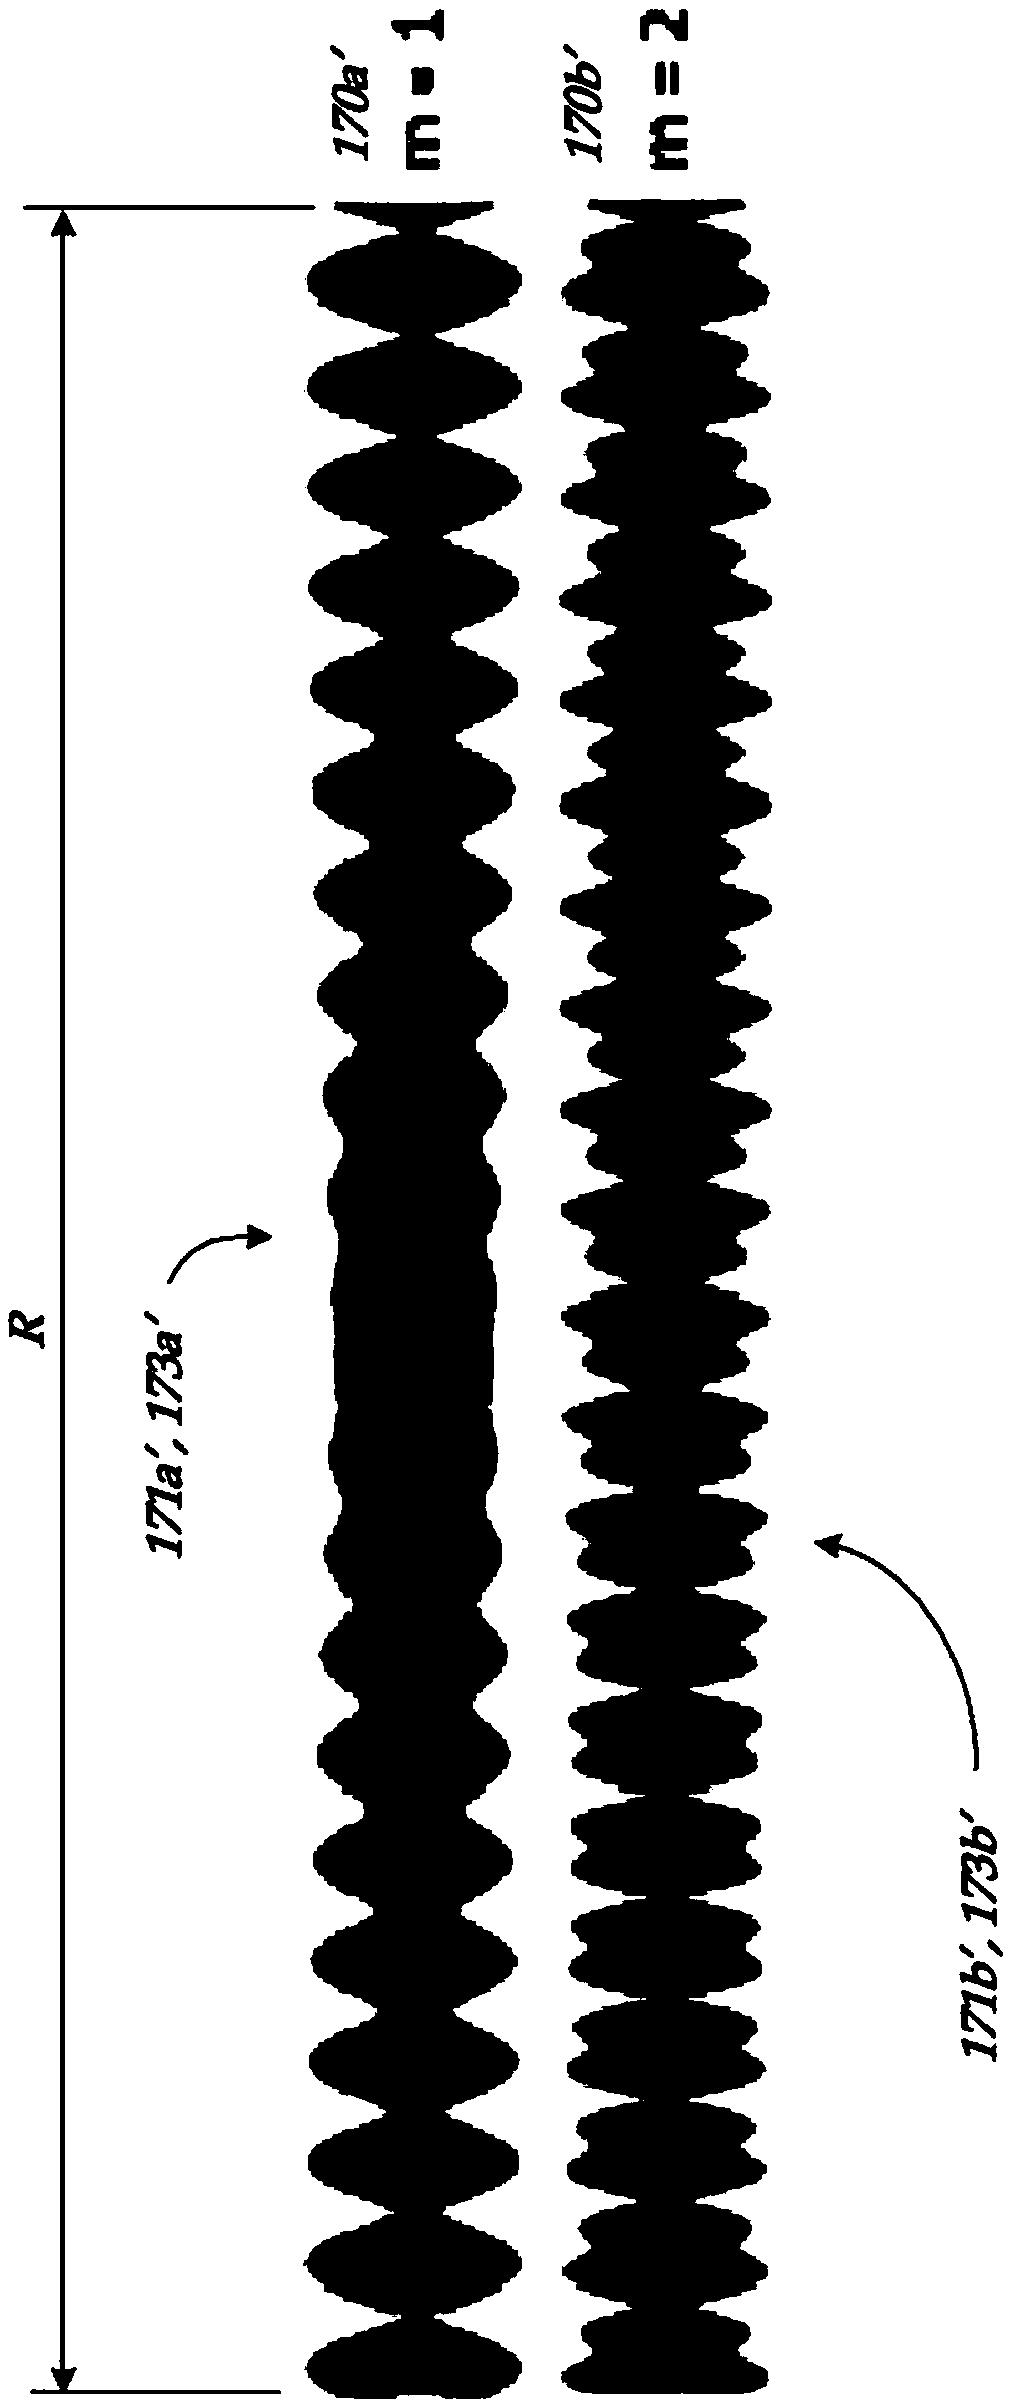 Absolute position encoder combining signals of two widely separated wavelengths